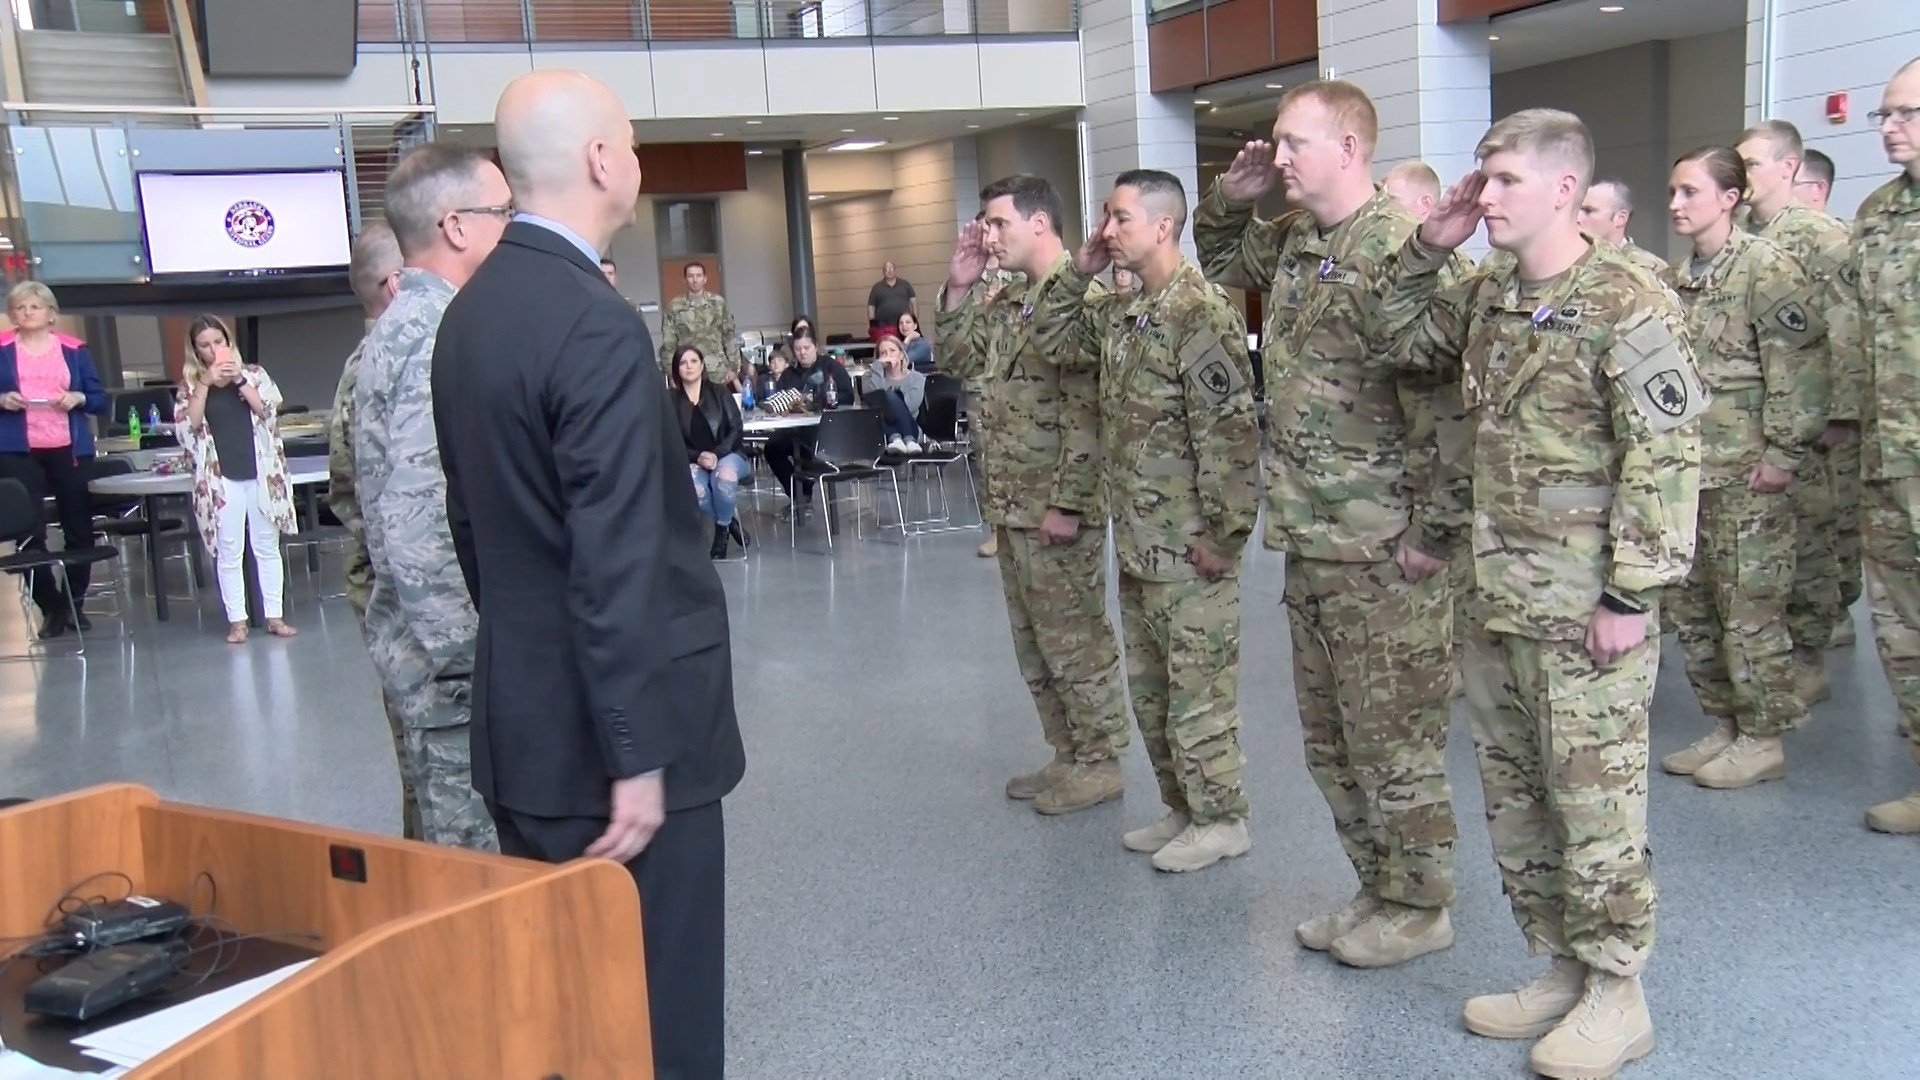 Ceremony honors four National Guard soldiers